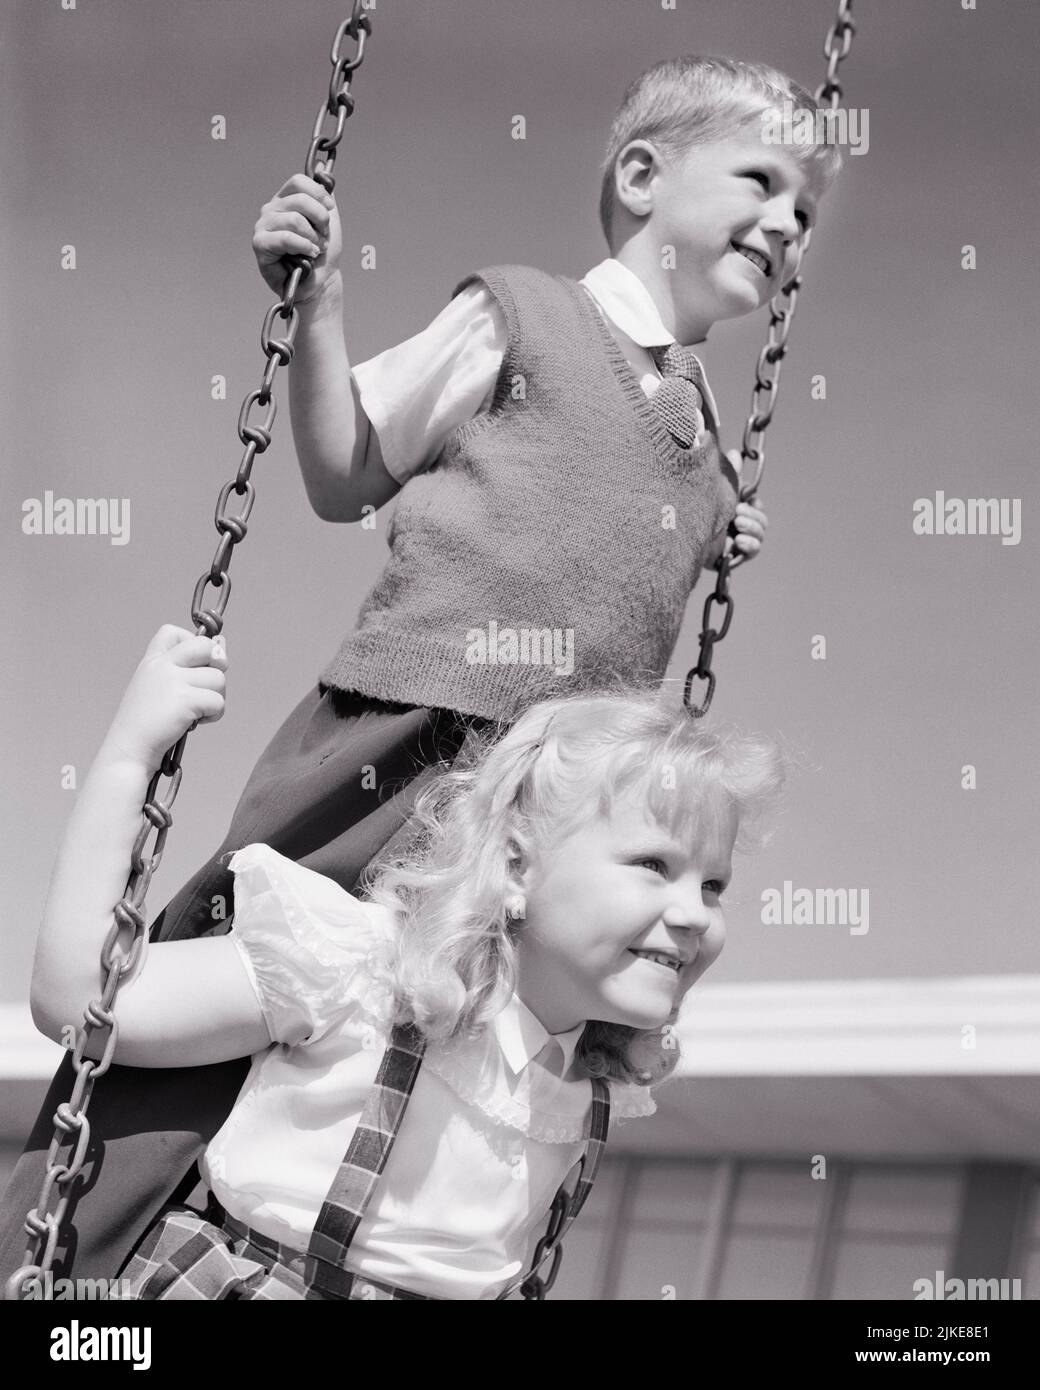 1950s BLONDE BOY AND GIRL ON PLAYGROUND SWING SET GIRL SITTING ON SWING SEAT AND BOY STANDING BEHIND HER - j7551 HAR001 HARS 1 SEAT JUVENILE ELEMENTARY BLOND FRIEND BALANCE TEAMWORK PLEASED JOY LIFESTYLE FEMALES BROTHERS HEALTHINESS COPY SPACE FRIENDSHIP HALF-LENGTH PERSONS MALES SIBLINGS SISTERS B&W SCHOOLS GRADE HAPPINESS CHEERFUL AND EXCITEMENT RECESS RECREATION PRIMARY SIBLING SMILES CONNECTION FRIENDLY JOYFUL GRADE SCHOOL TOGETHERNESS BLACK AND WHITE CAUCASIAN ETHNICITY HAR001 OLD FASHIONED Stock Photo